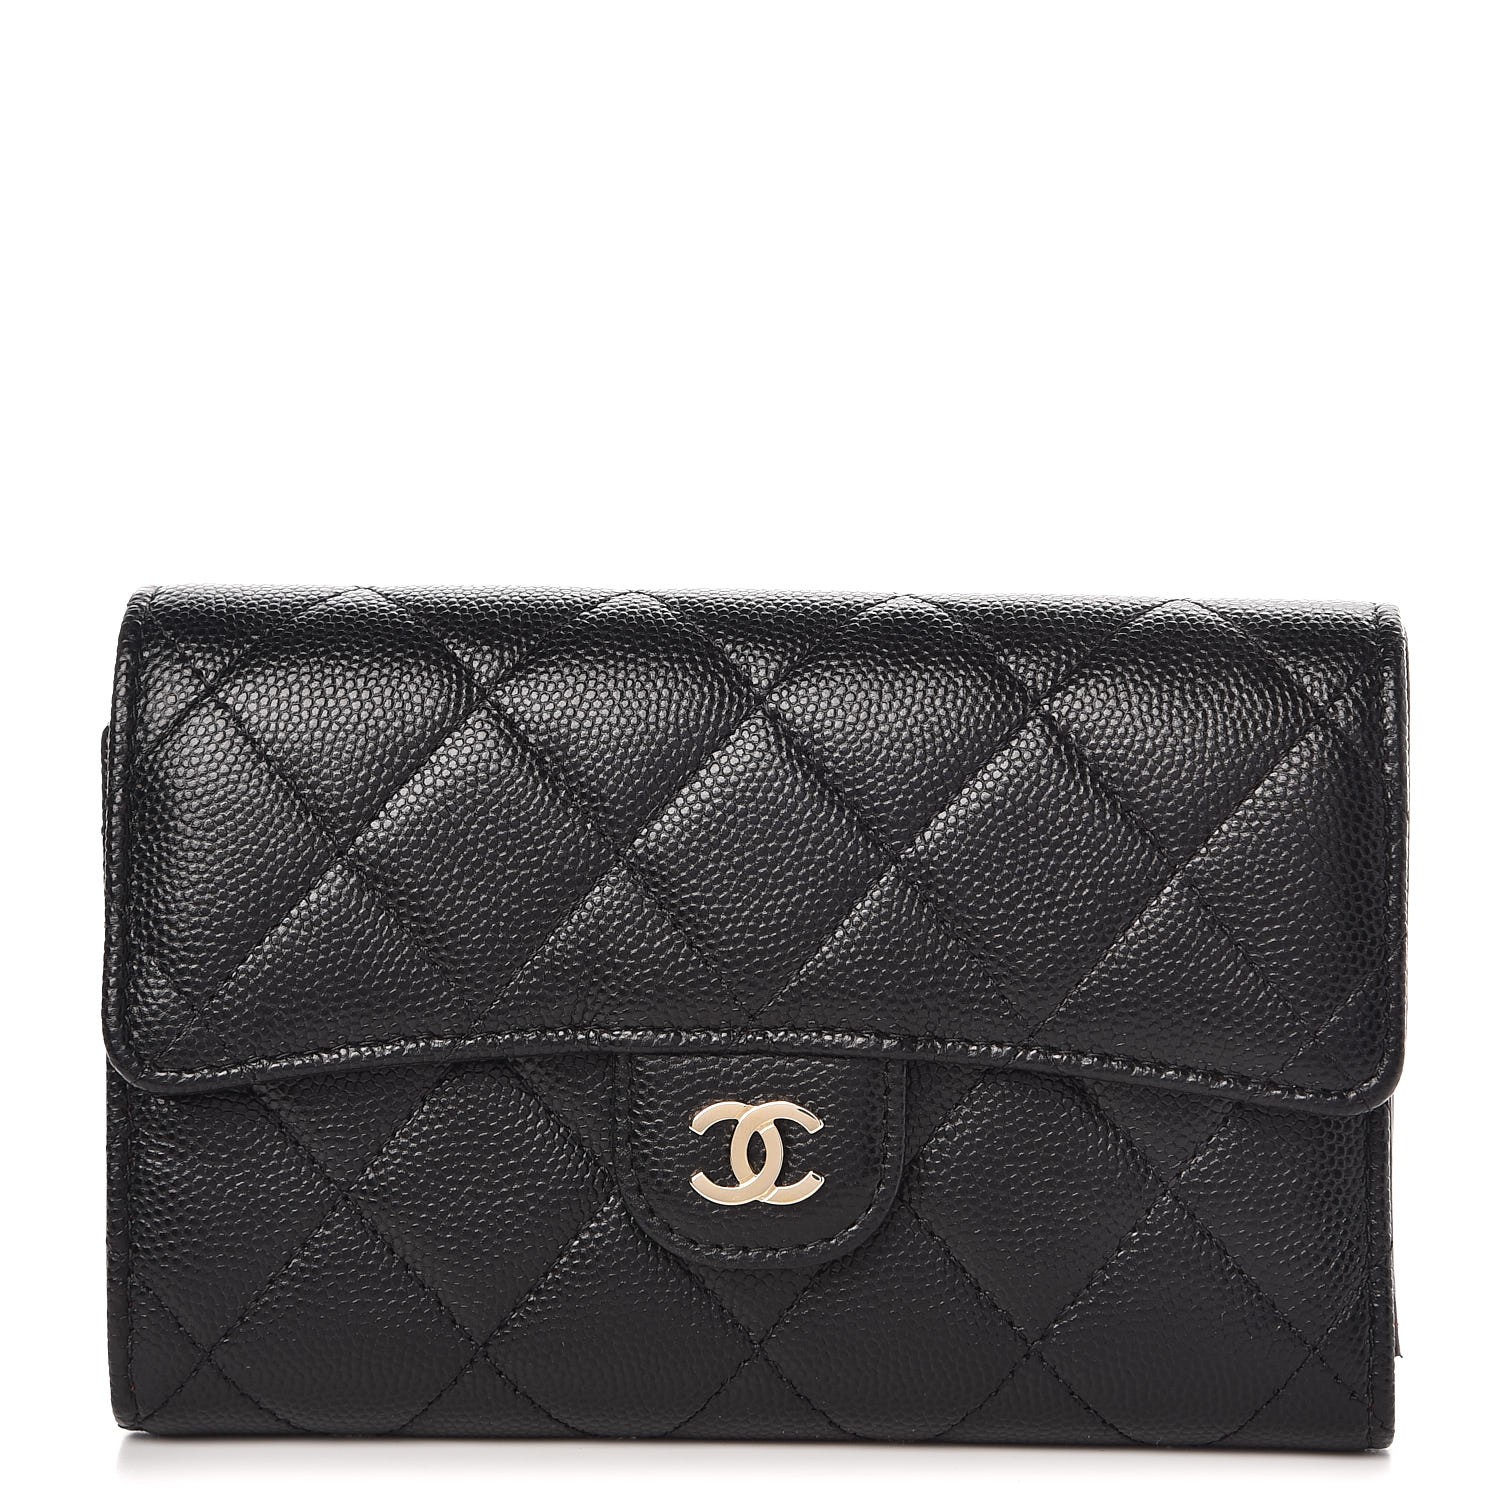 CHANEL Caviar Quilted Medium Flap Wallet Black 298301